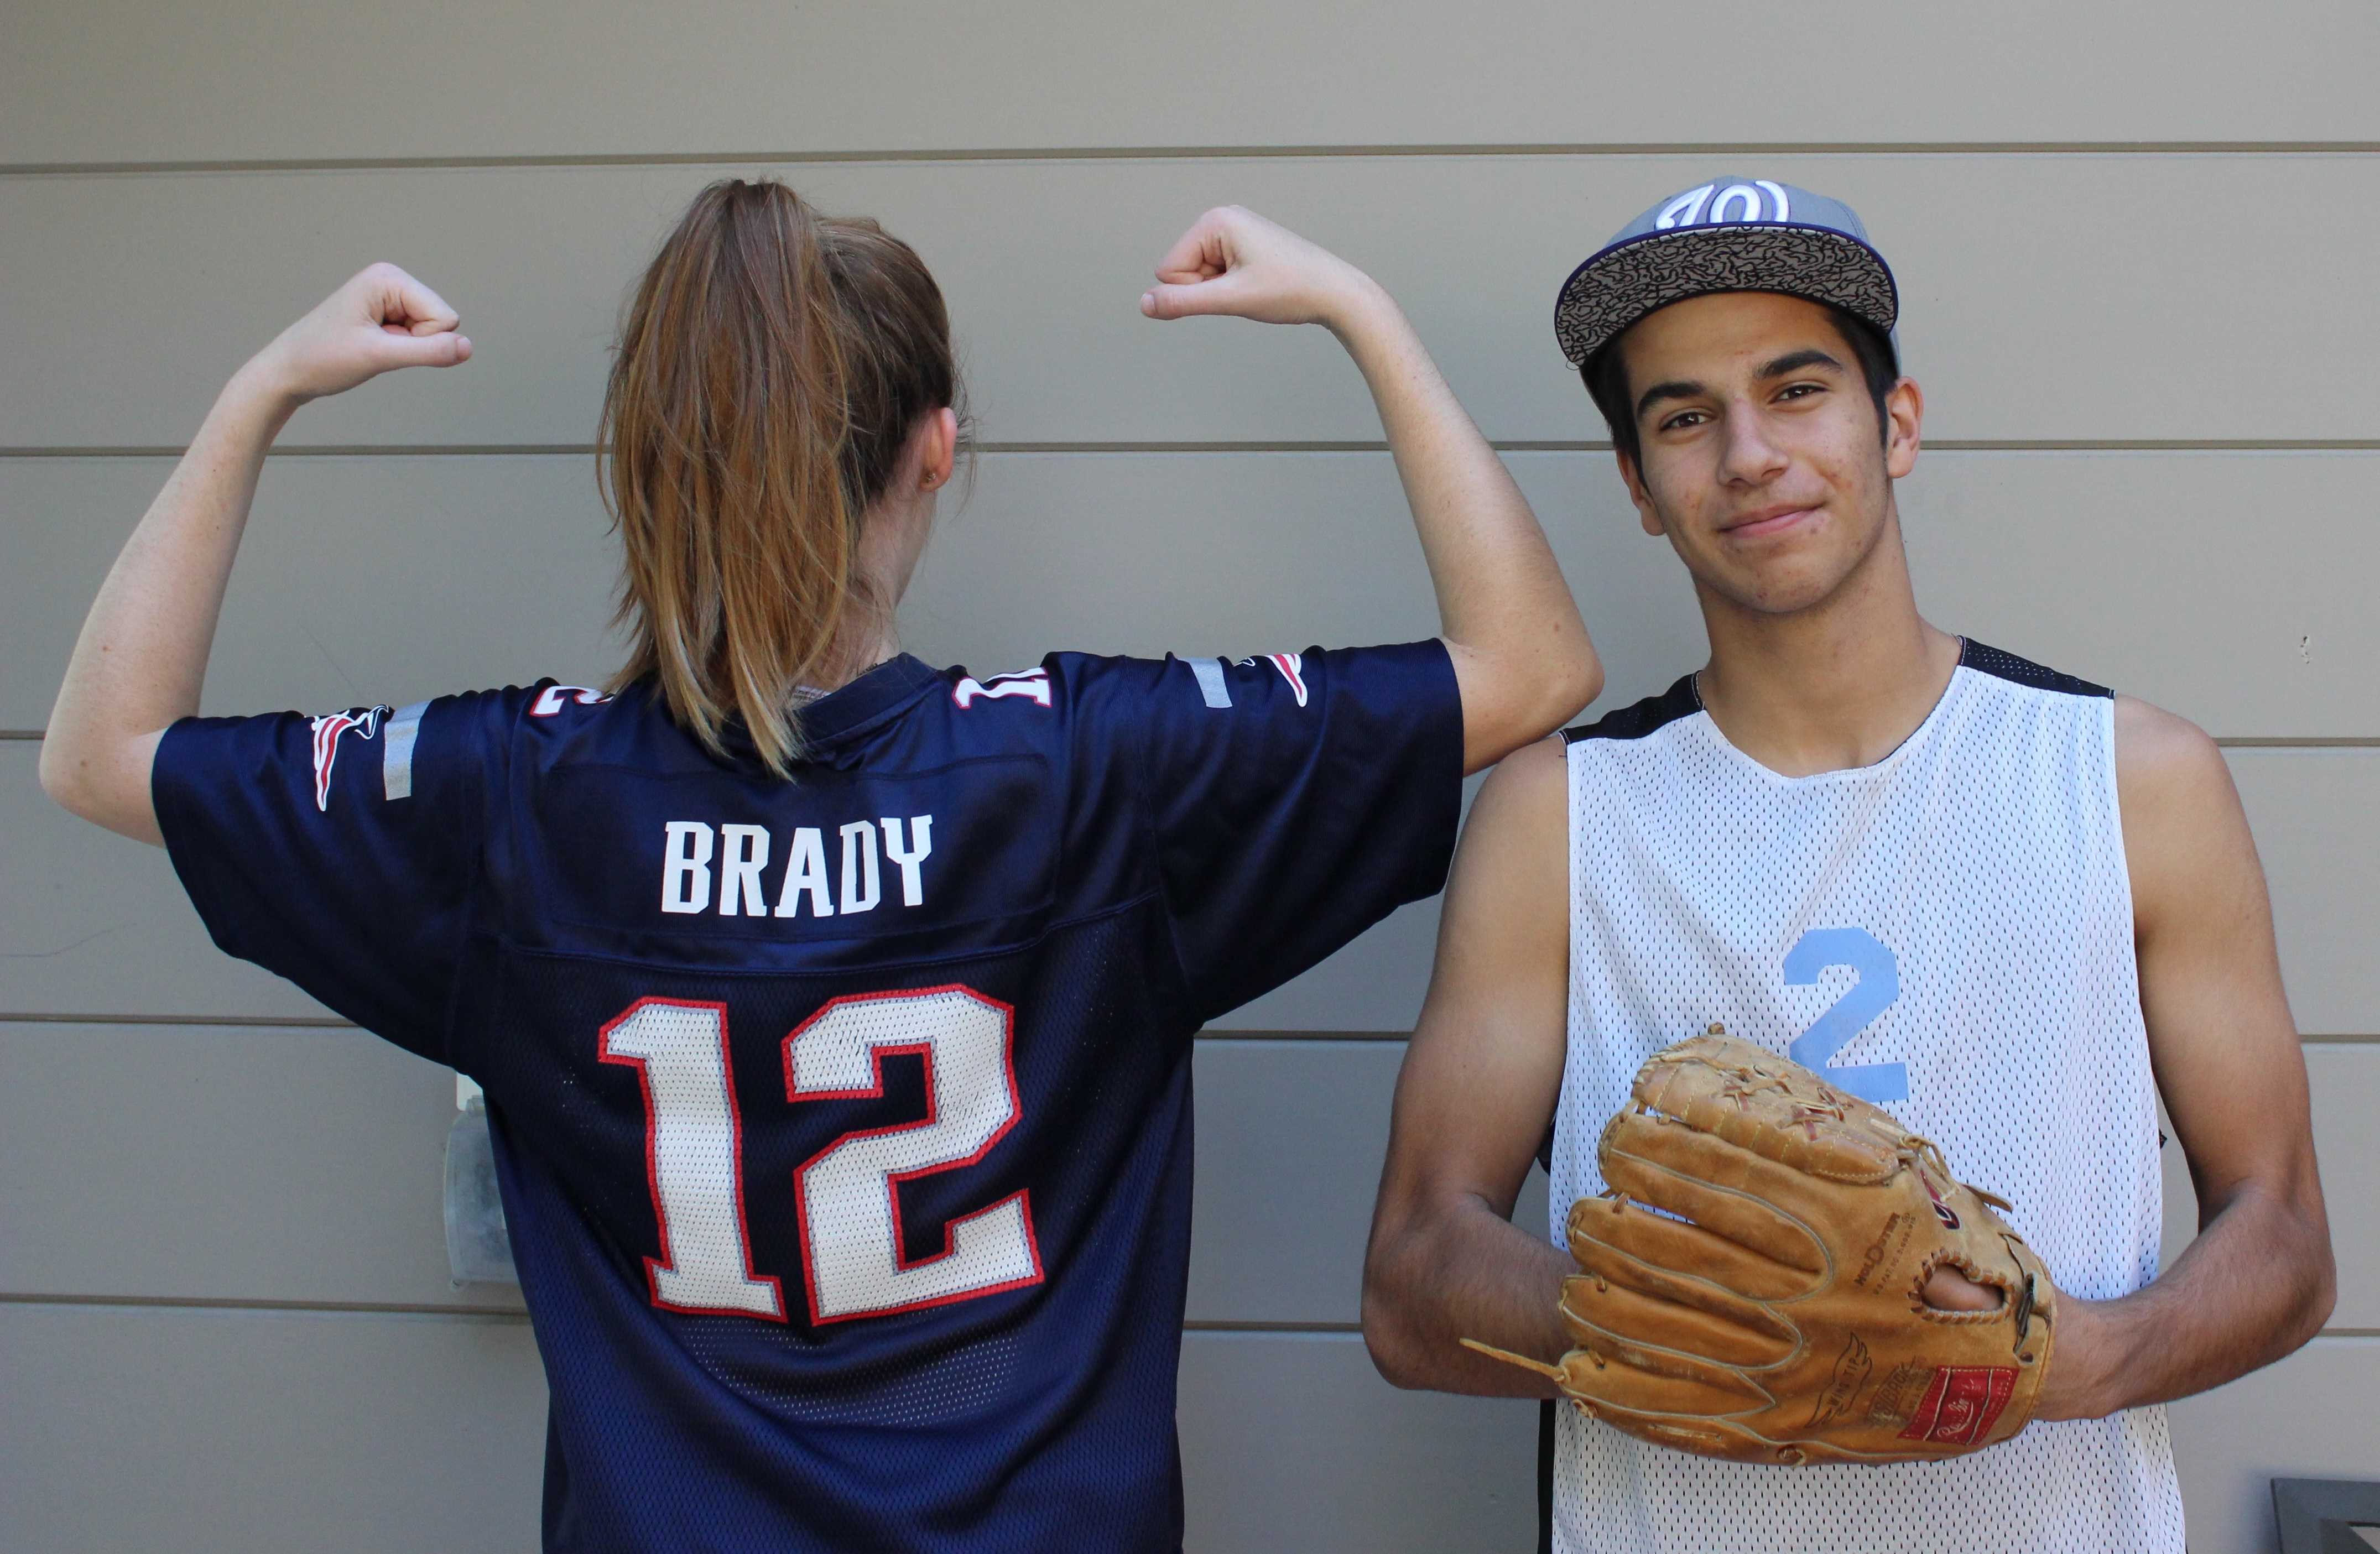 Staff Writers Kasra Orumchian and Isabella Marcus wear their favorite sports gear for the freshman spirit day "Healthy Choice". Photo by Sherwin Amsbaugh